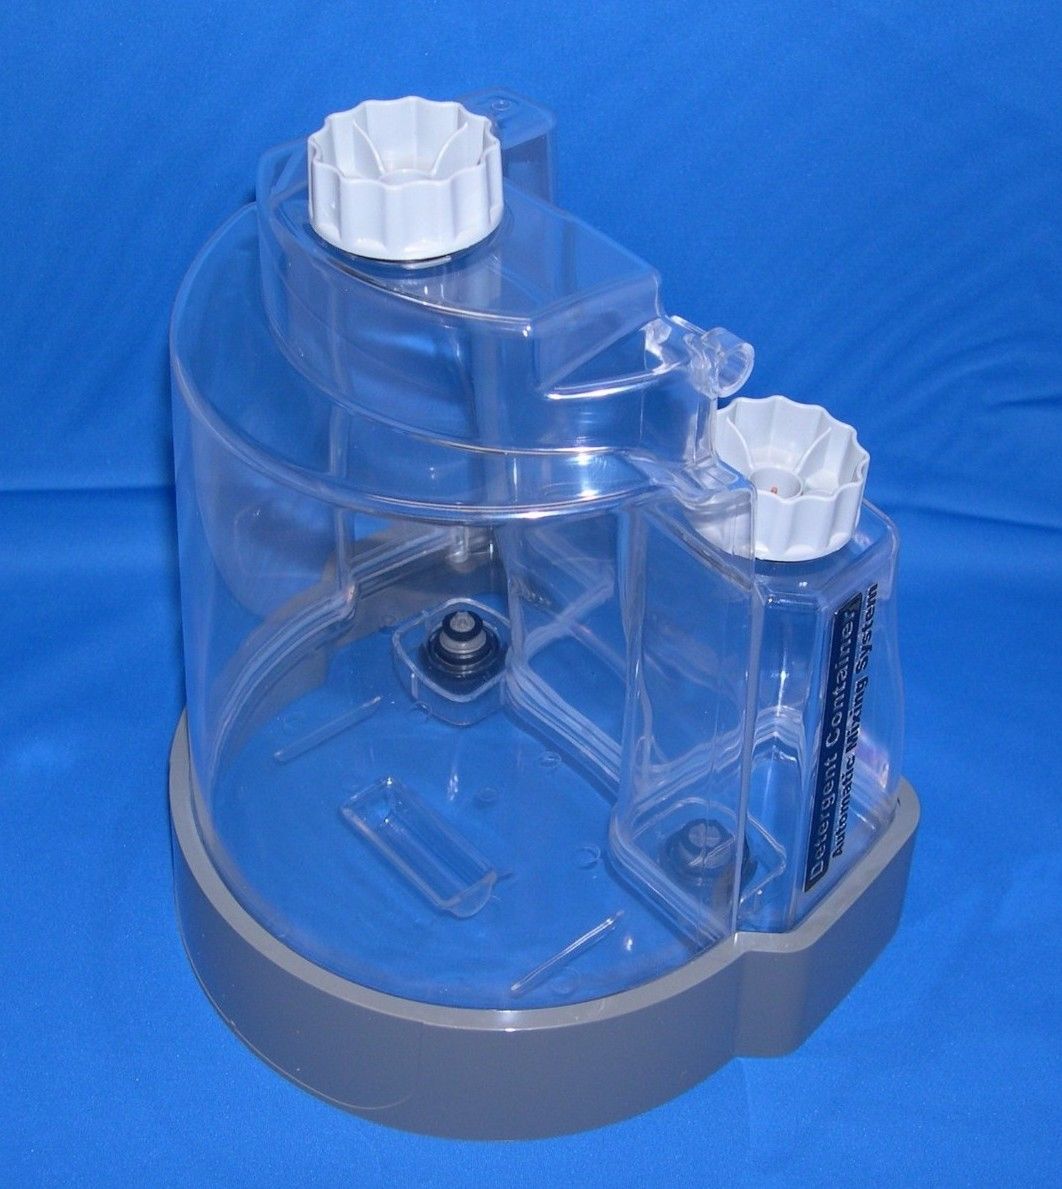 Featured image for “New Hoover Steam Vac Solution Tank 42272137 37277-005”